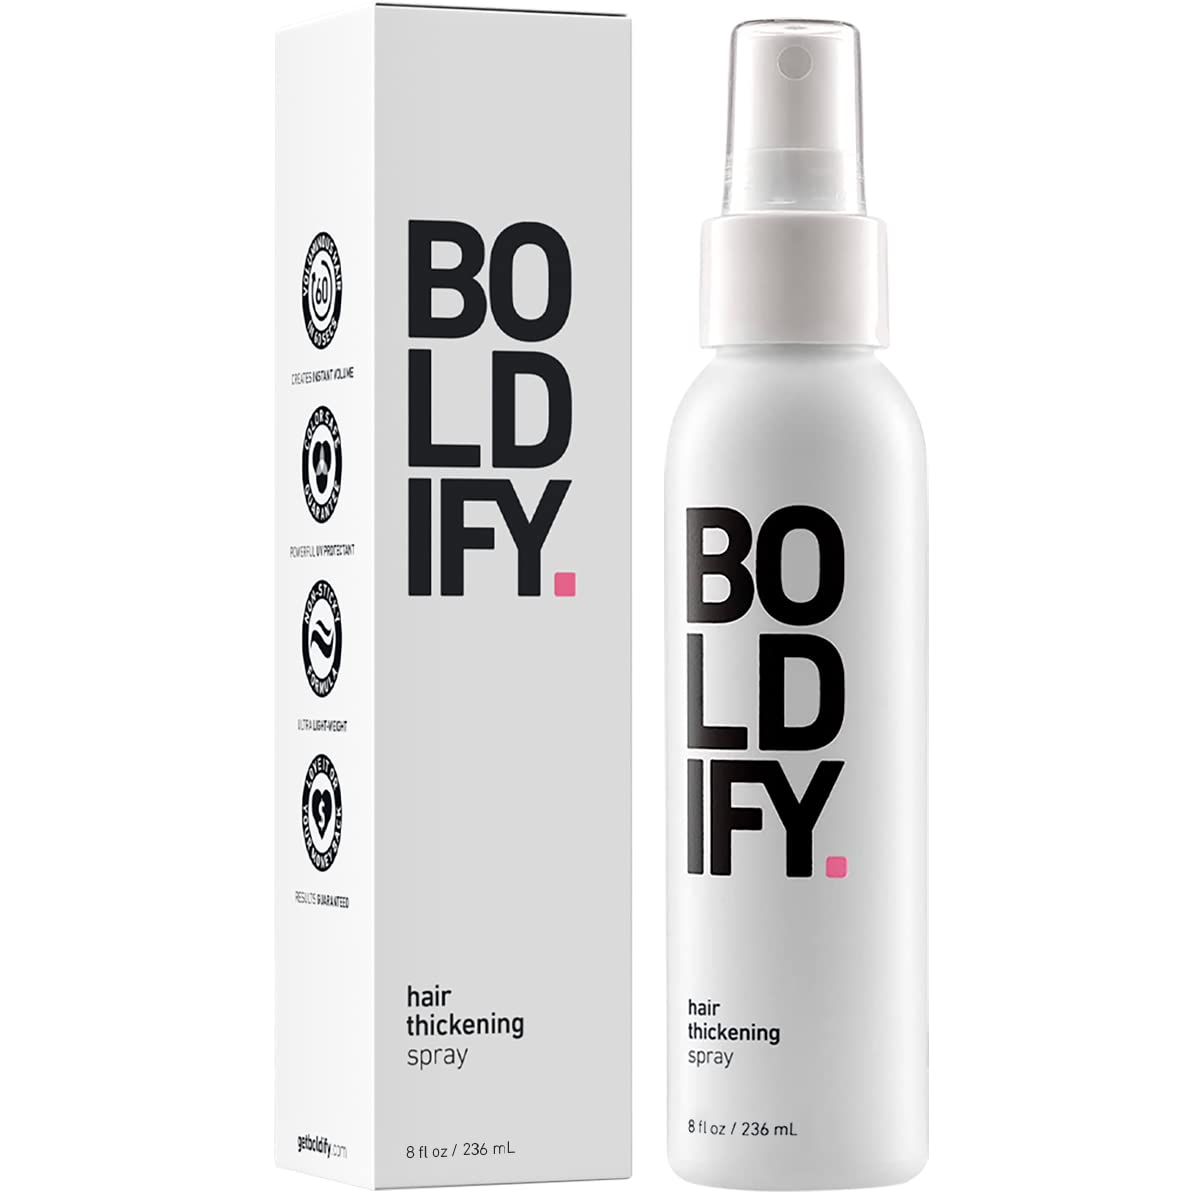 Boldify Hair Thickening Spray - Stylist Recommended [...]